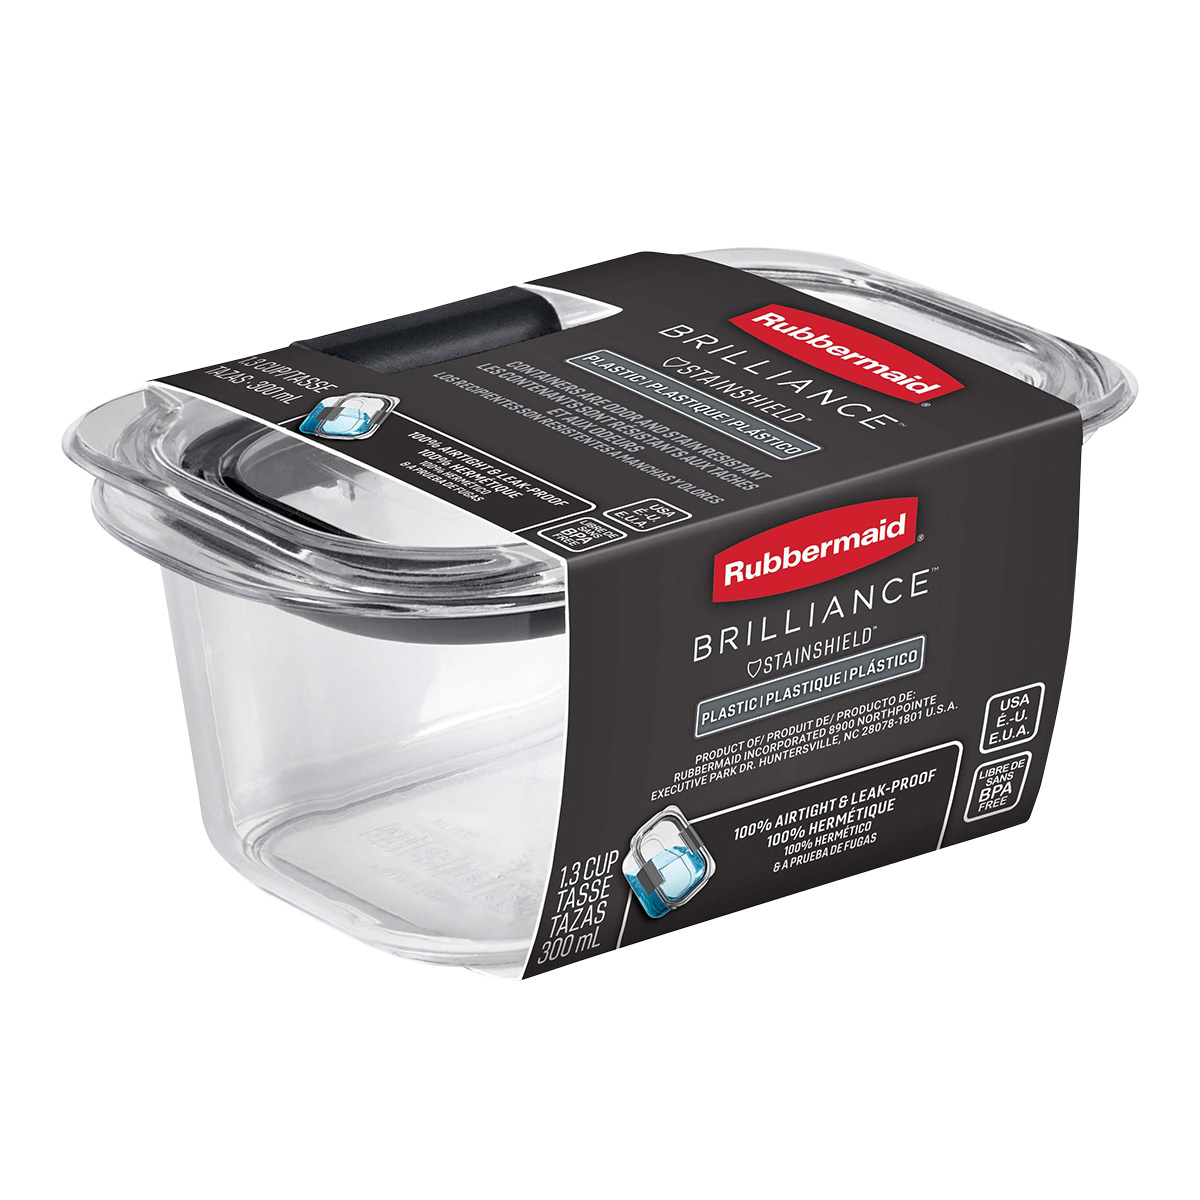 https://images.containerstore.com/catalogimages/498207/10096071-2183408_01-rubbermaid-ven.jpg